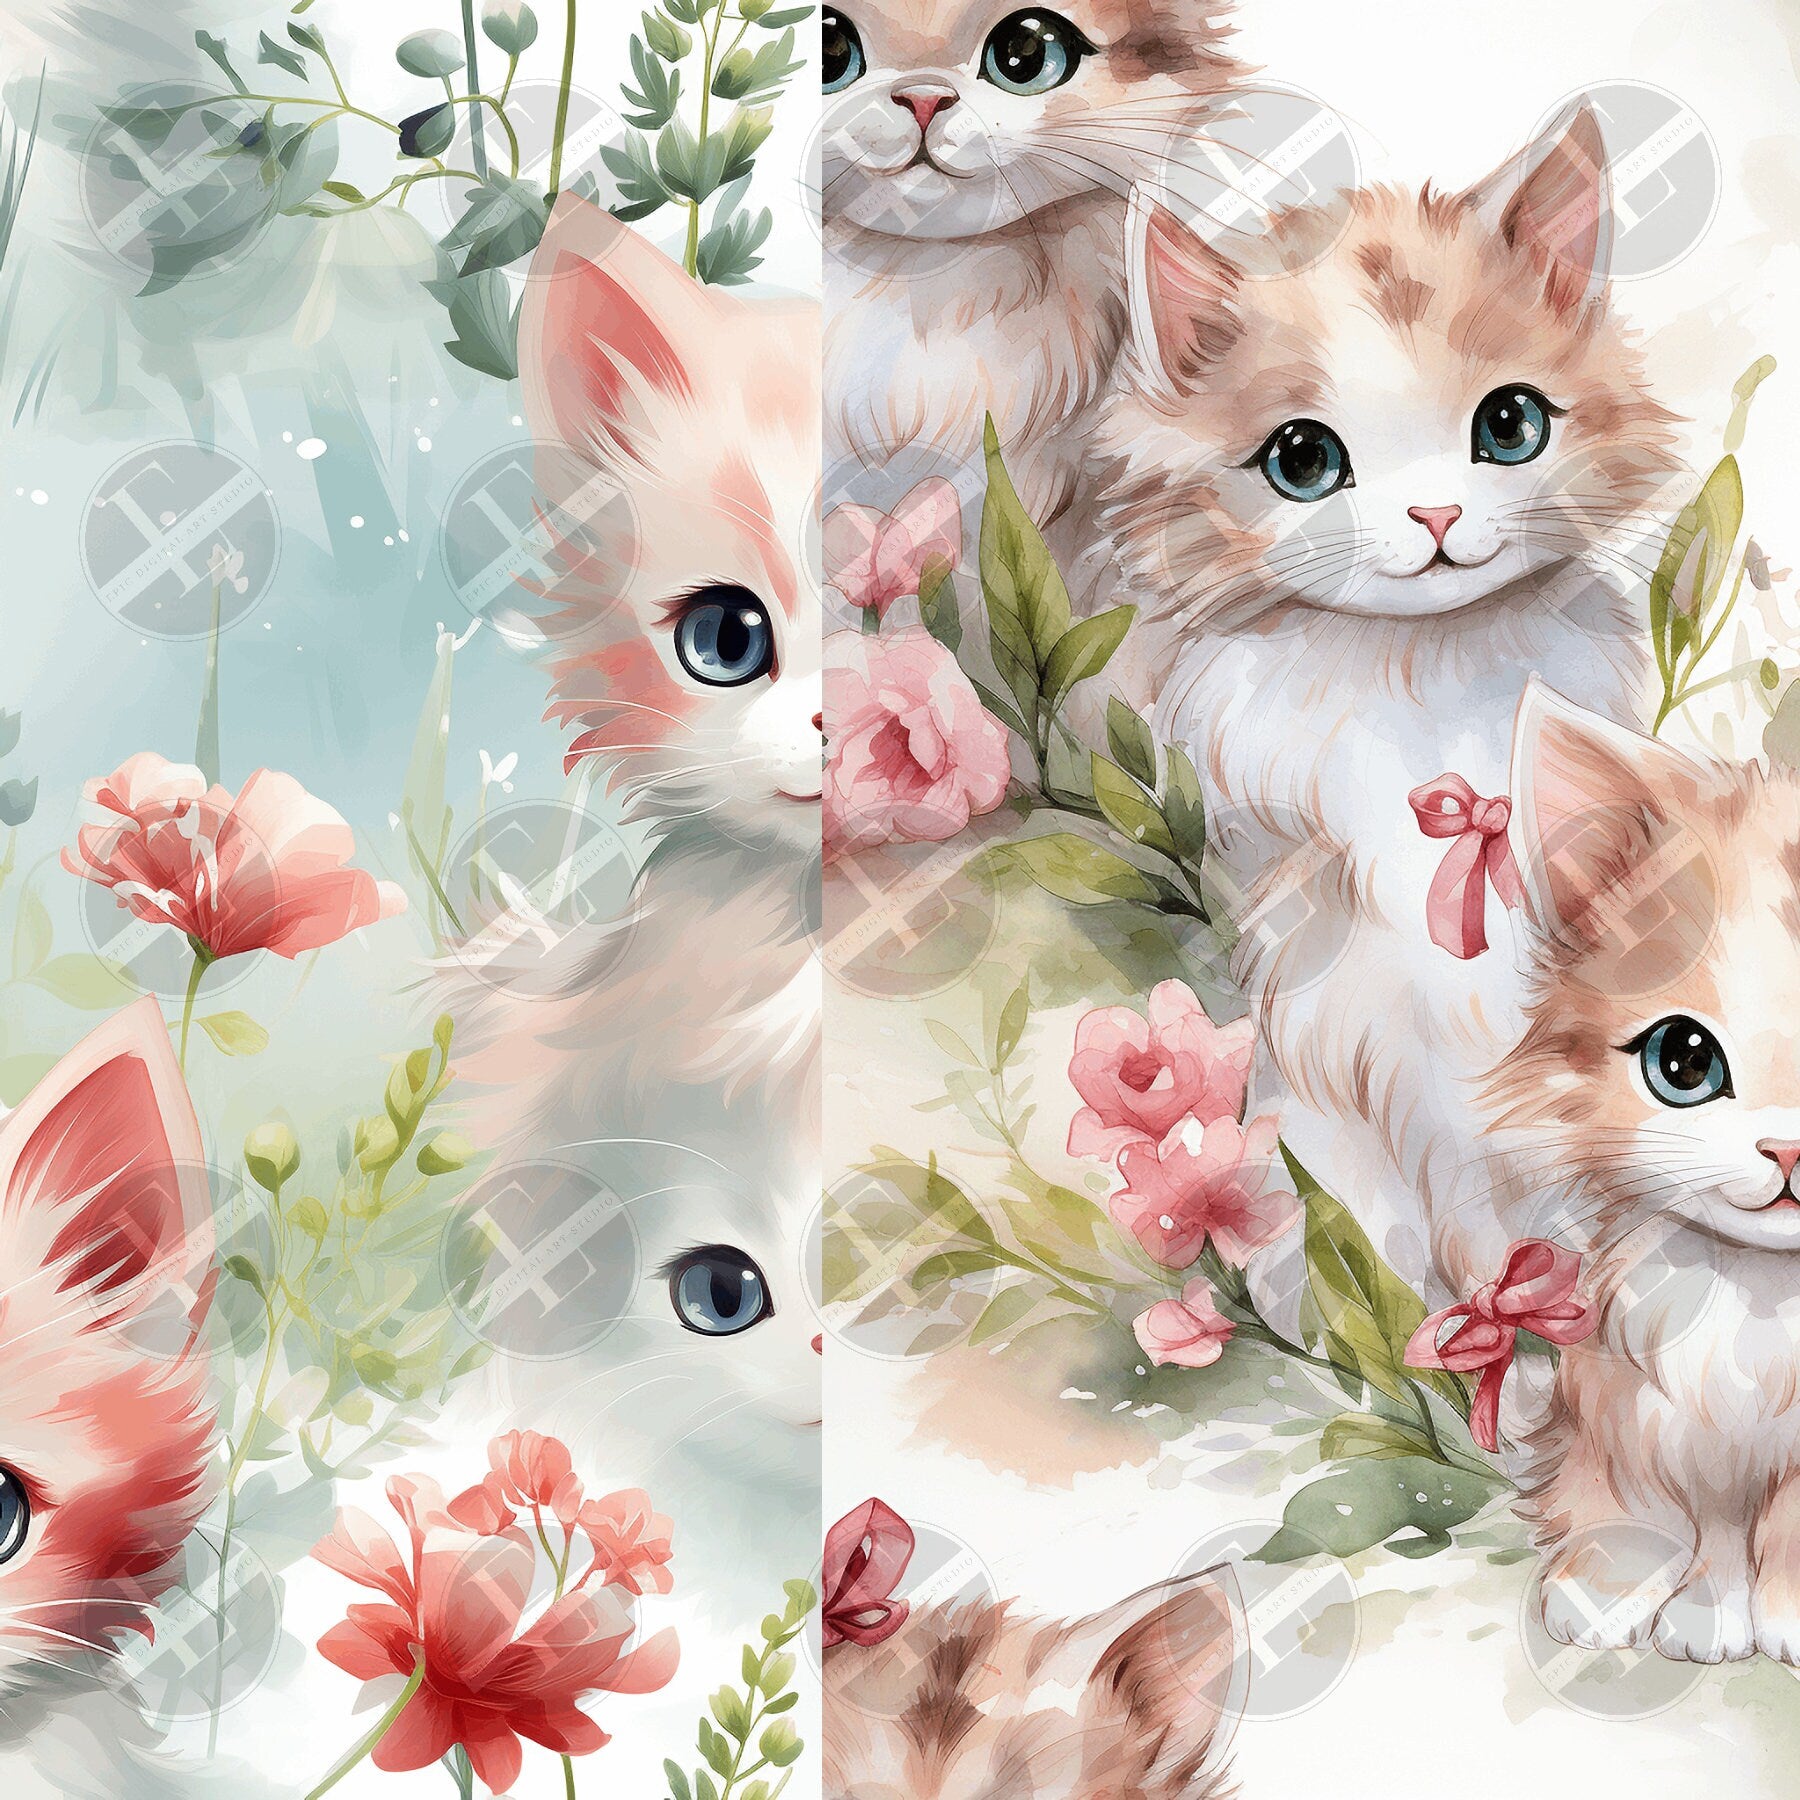 Cute Cat Seamless Patterns Digital Download PNG - Bundle of 16 - Shabby Chic Soft Watercolor Kittens Patterns - Commercial & Personal Use